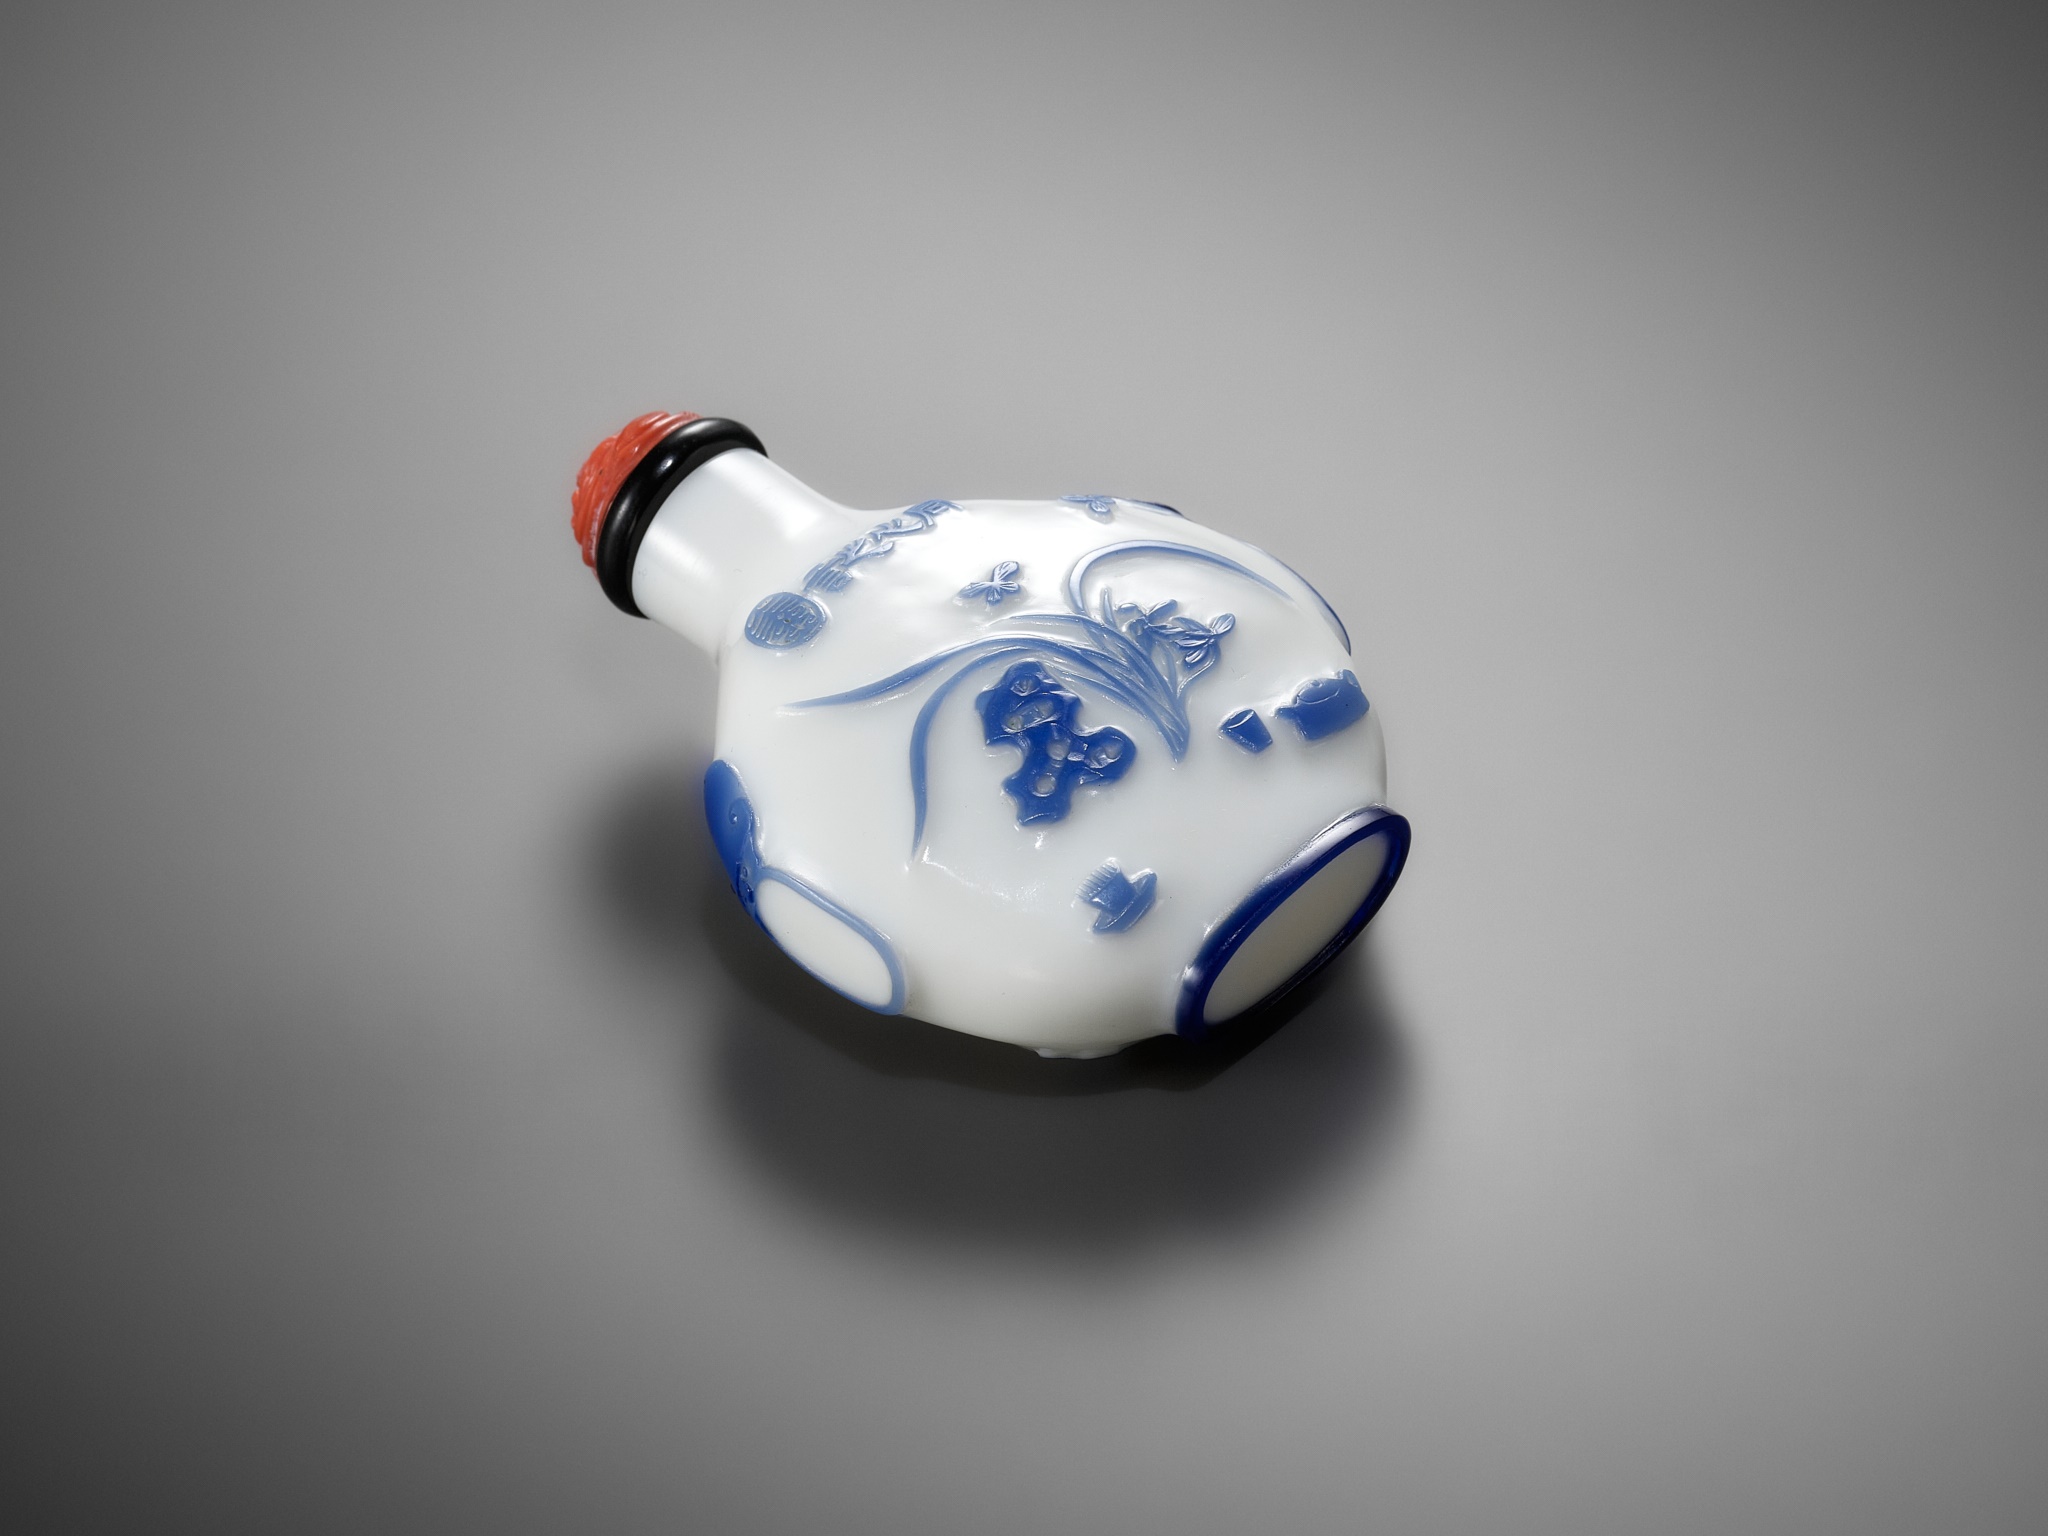 AN INSCRIBED SAPPHIRE-BLUE OVERLAY GLASS SNUFF BOTTLE, YANGZHOU SCHOOL, CHINA, 1800-1880 - Image 19 of 20